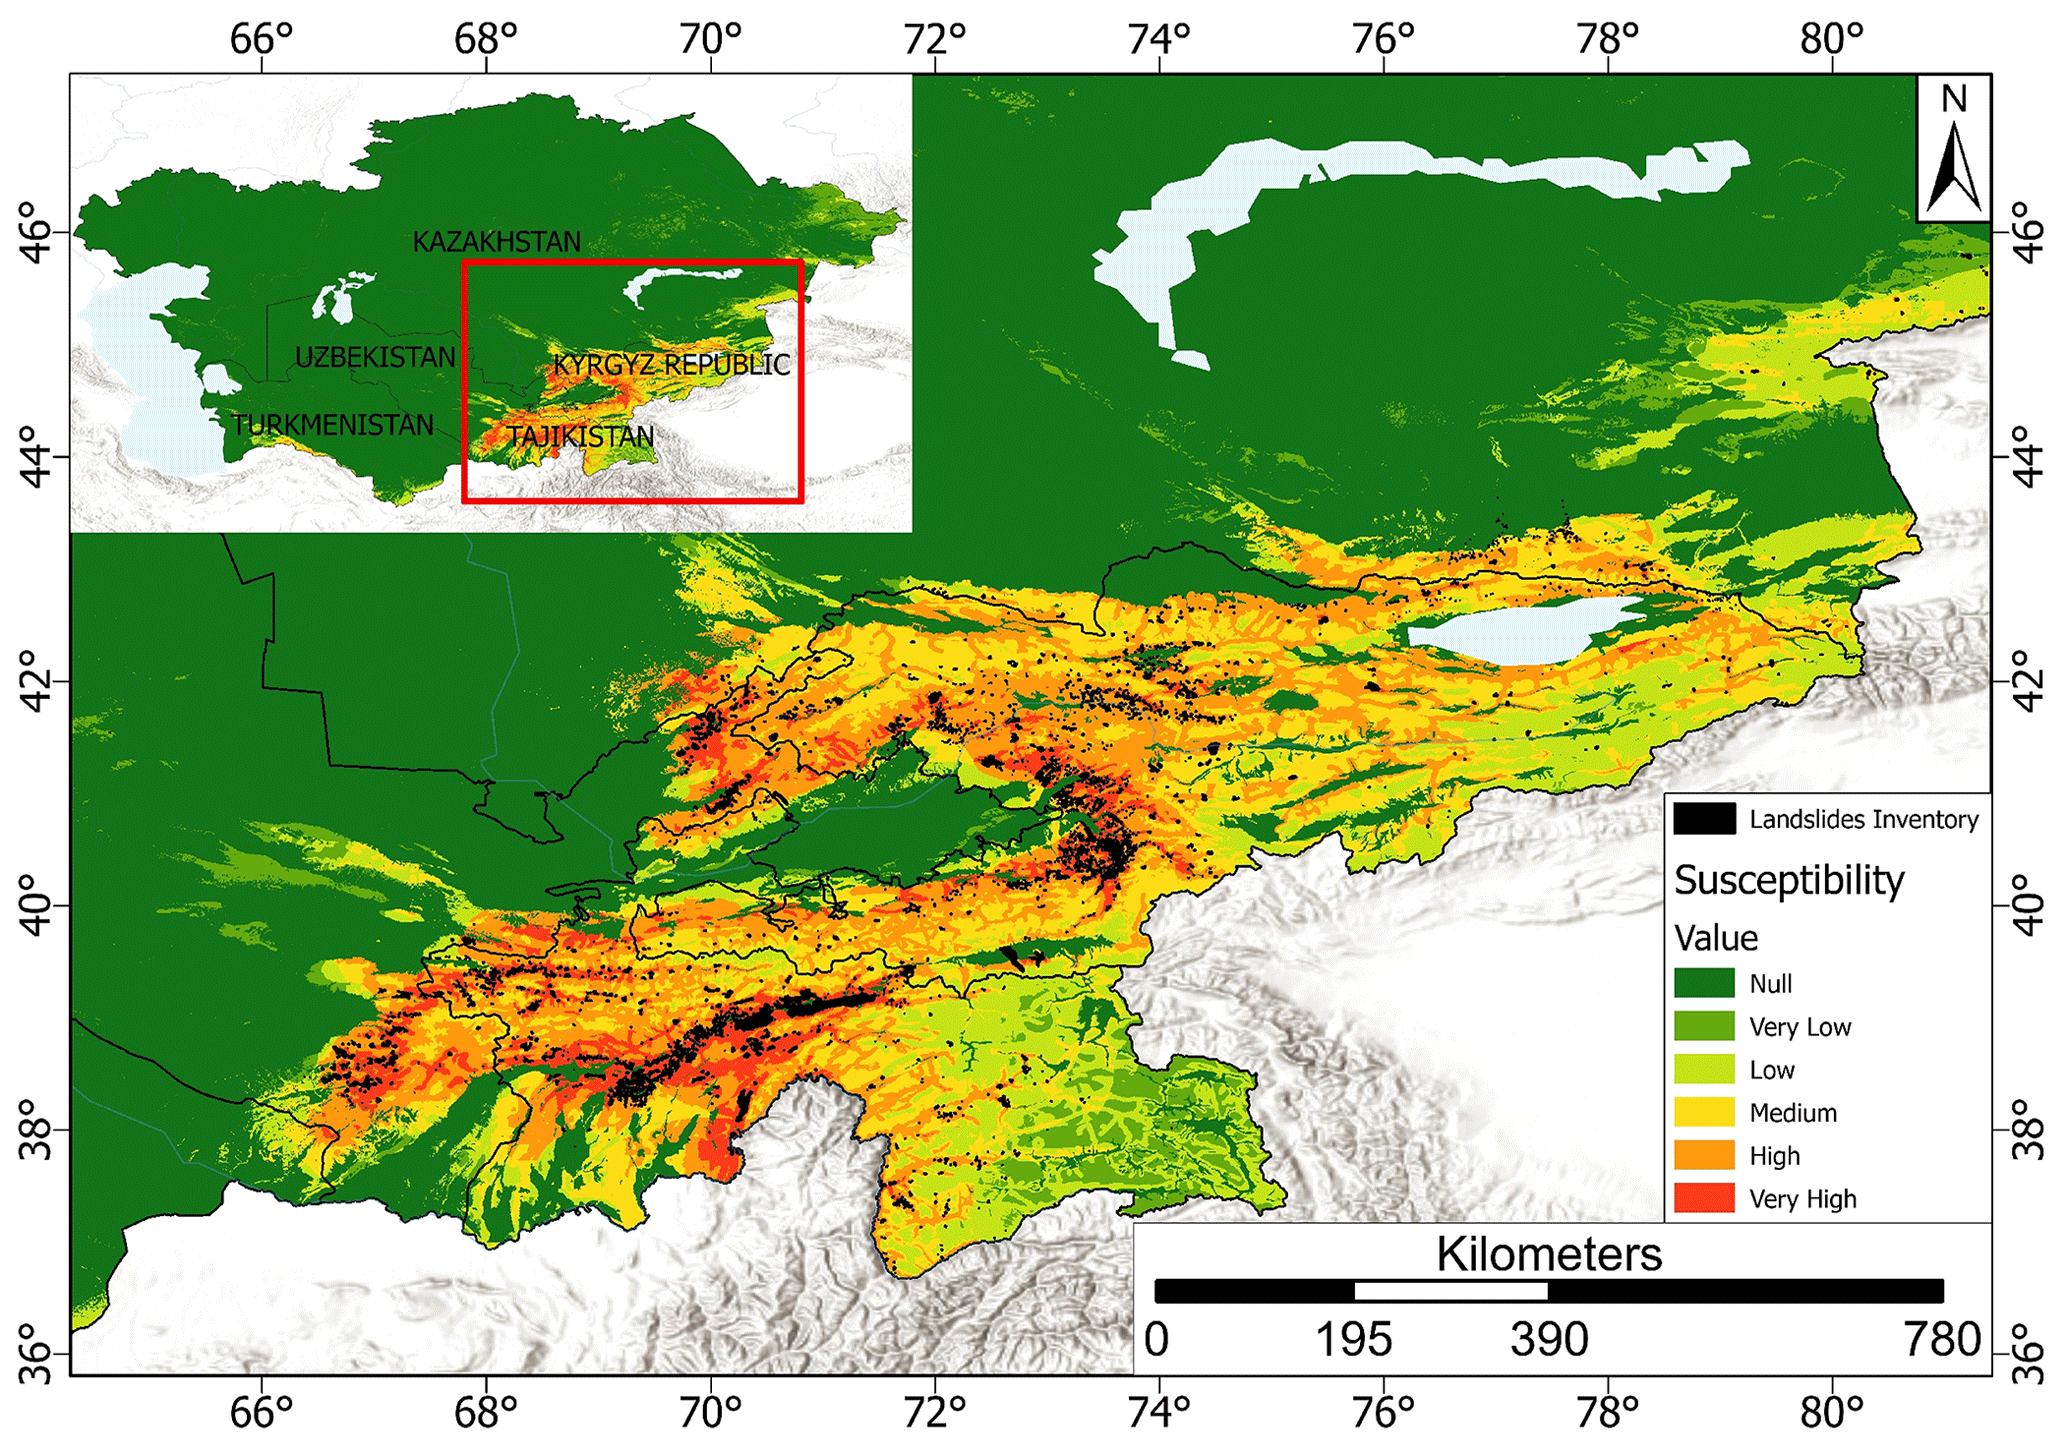 The landslide susceptibility map of Rosi et al. (2023) for a part of Central Asia.